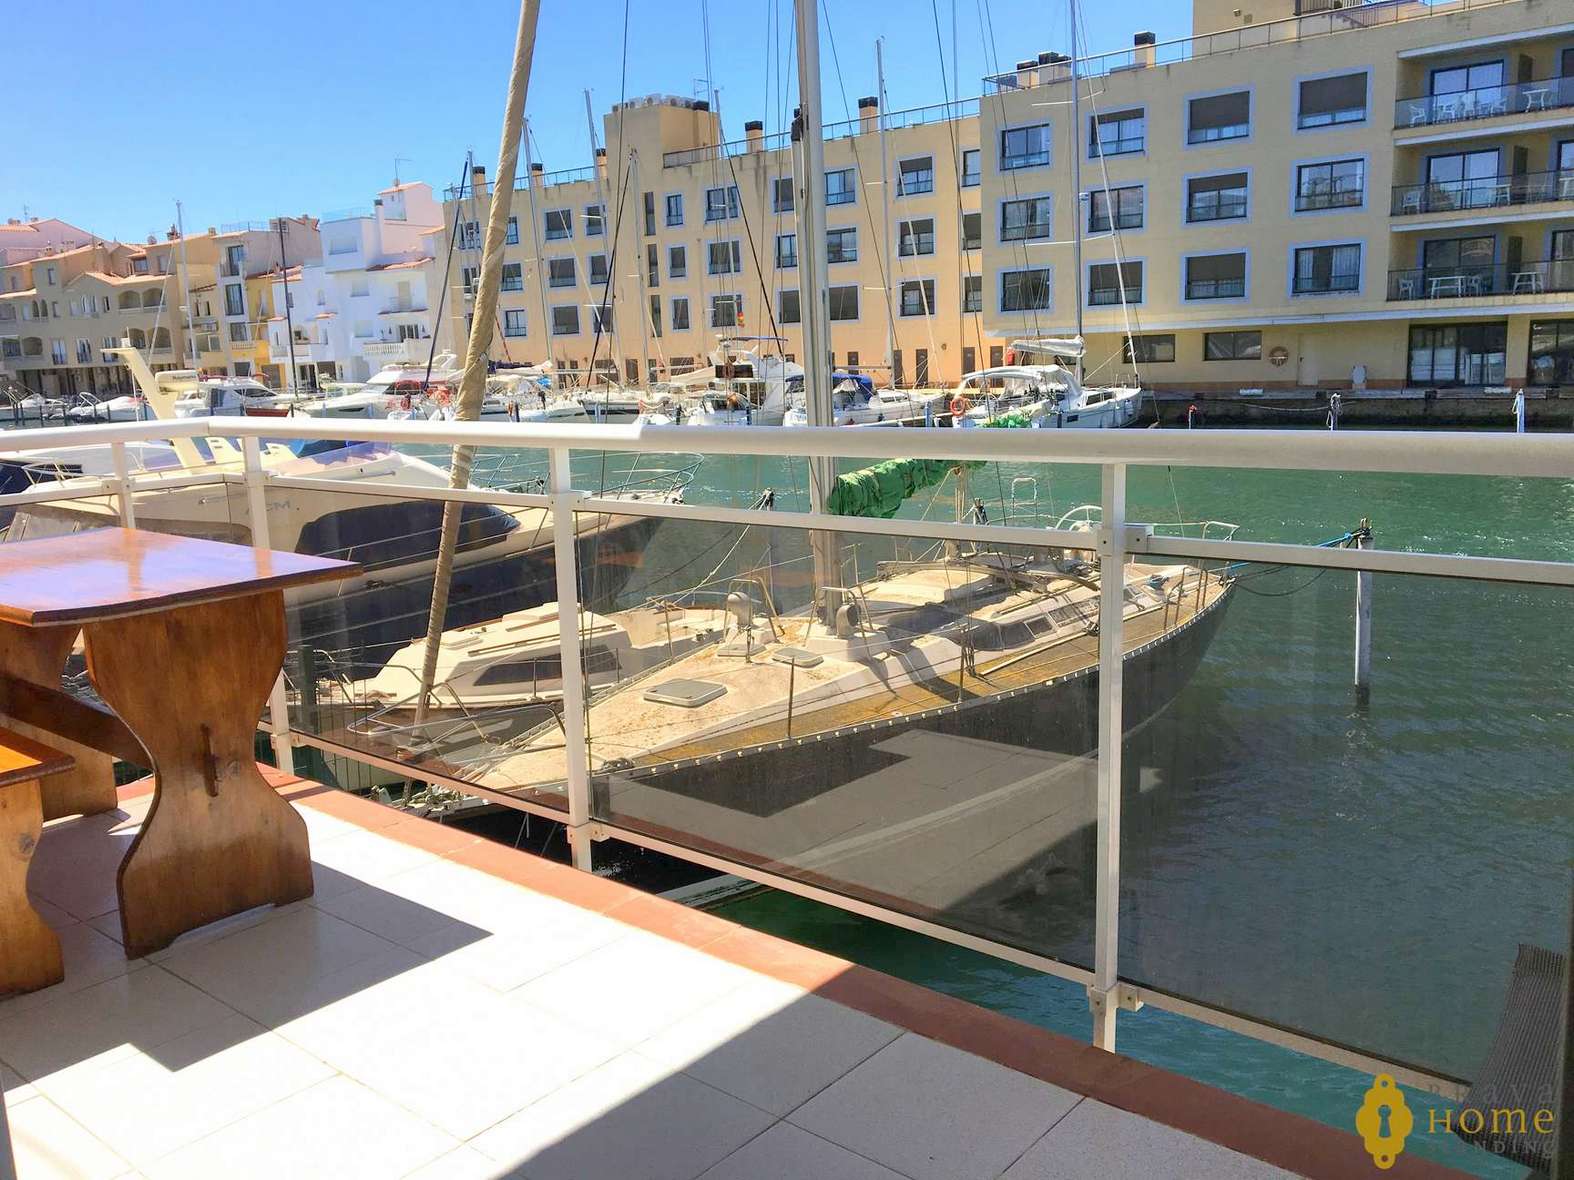 Beautiful apartment overlooking the canal, for sale in Empuriabrava